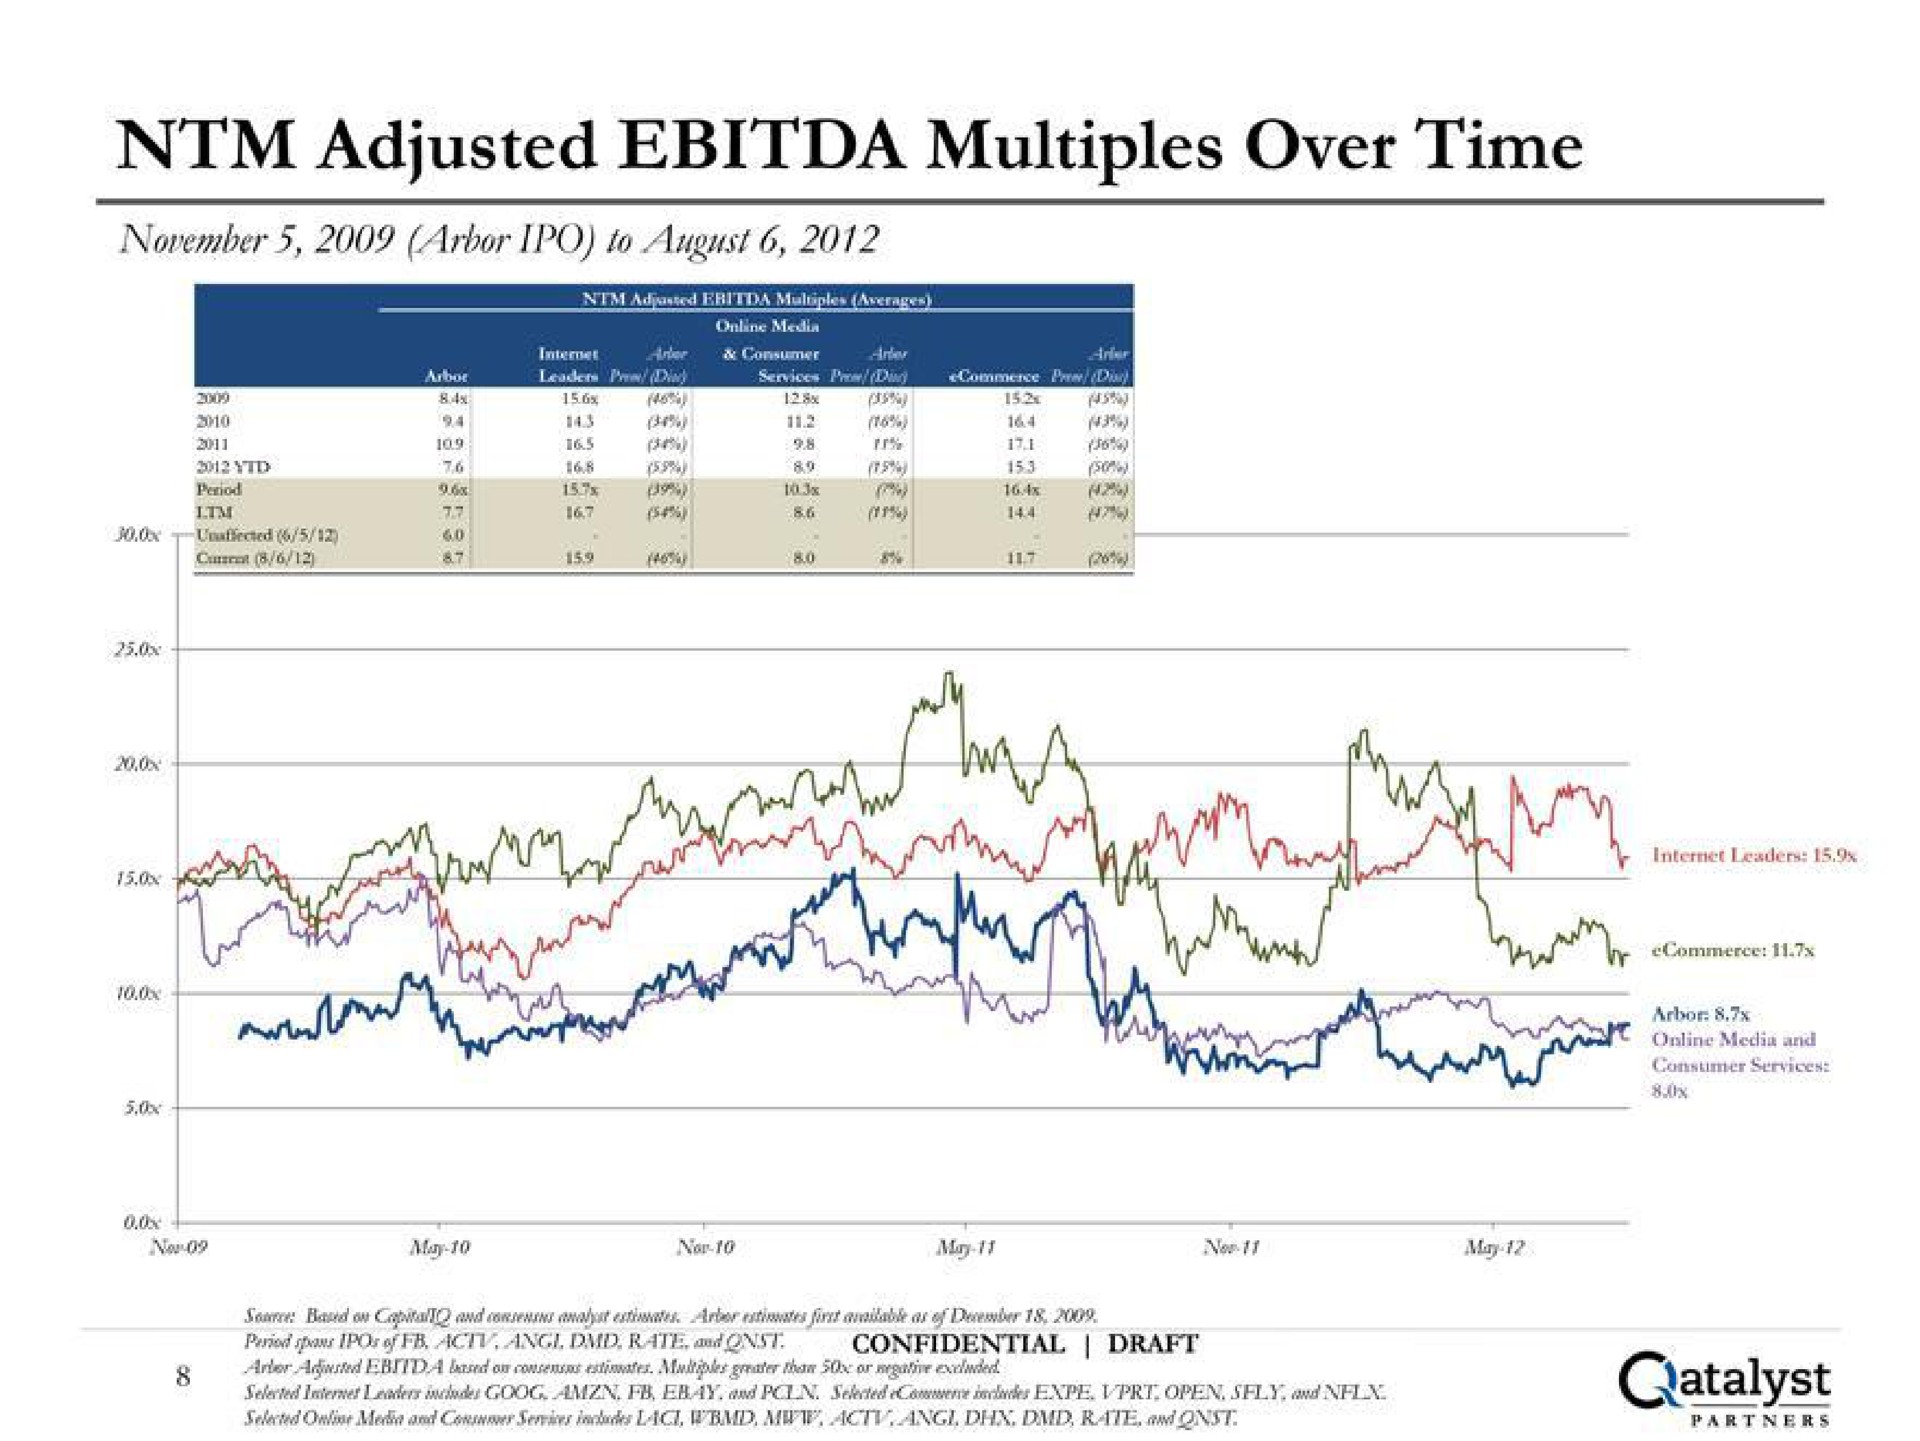 adjusted multiples over time catalyst | Qatalyst Partners